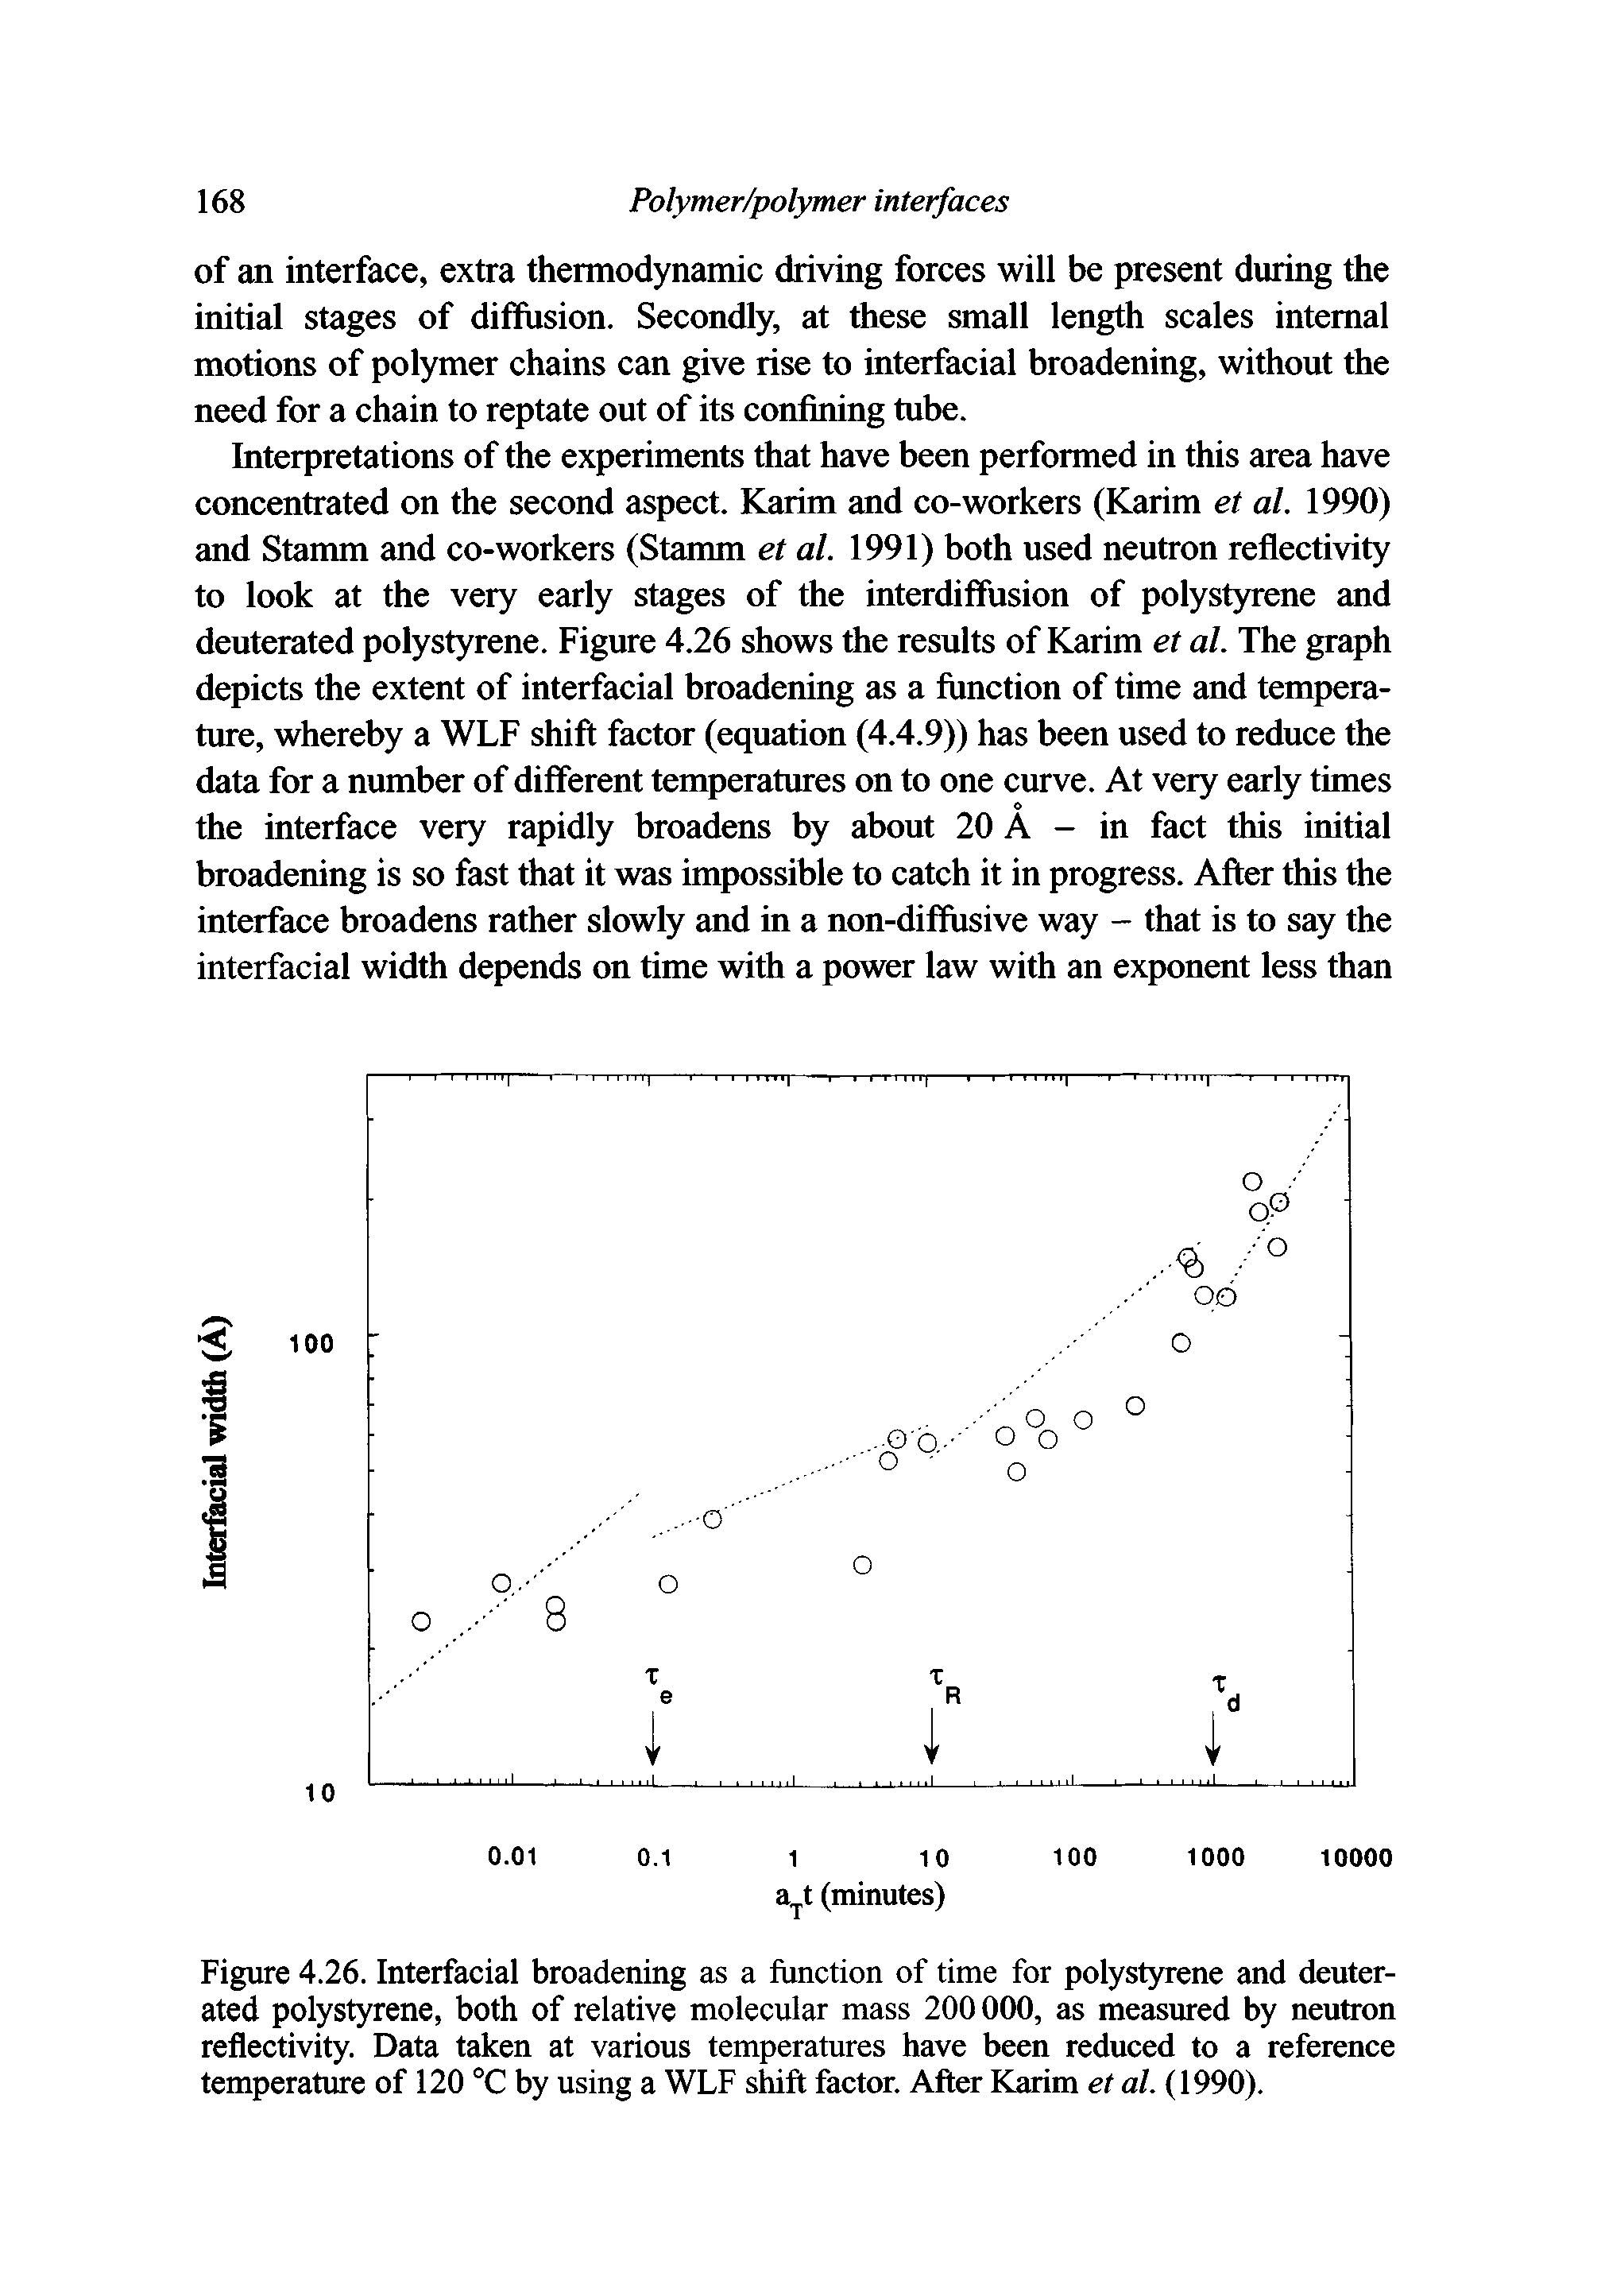 Figure 4.26. Interfacial broadening as a function of time for polyst5n-ene and deuterated polystyrene, both of relative molecular mass 200000, as measured by neutron reflectivity. Data taken at various temperatures have been reduced to a reference temperature of 120 C by using a WLF shift factor. After Karim et al. (1990).